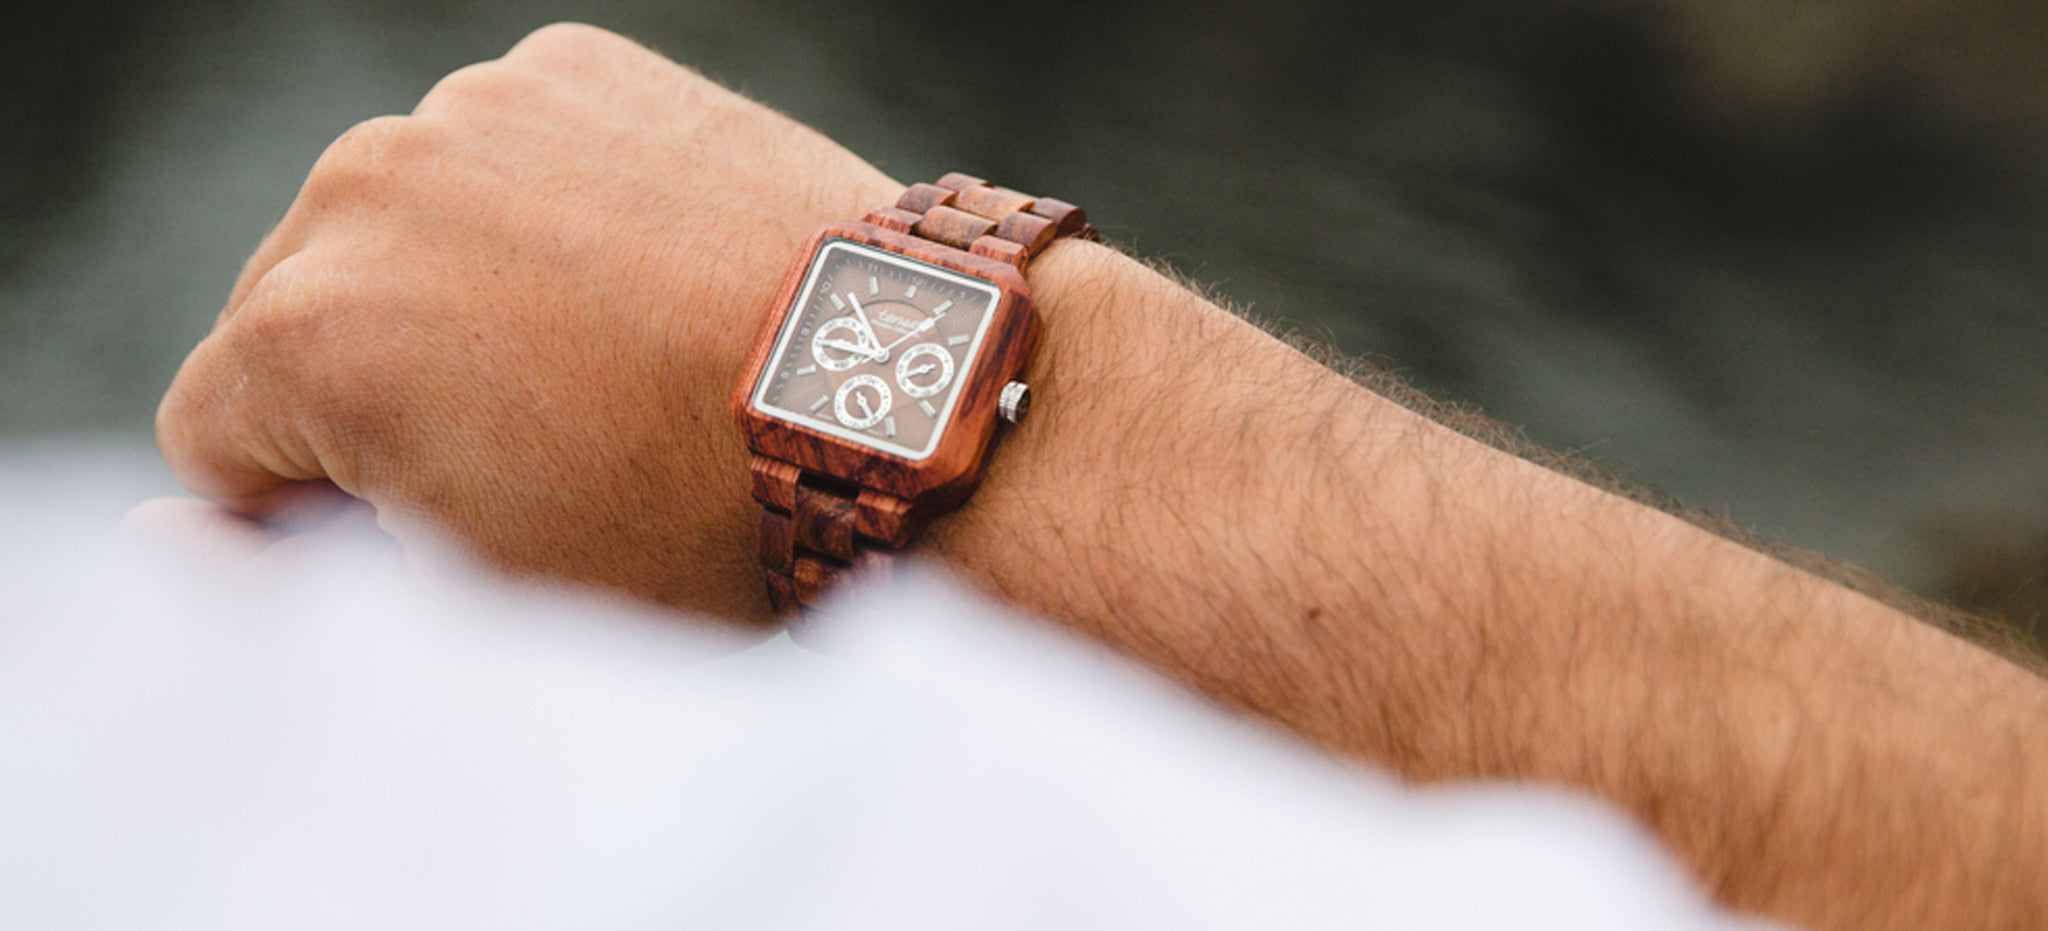 Tense Watches Square Watches - The Summit Watch